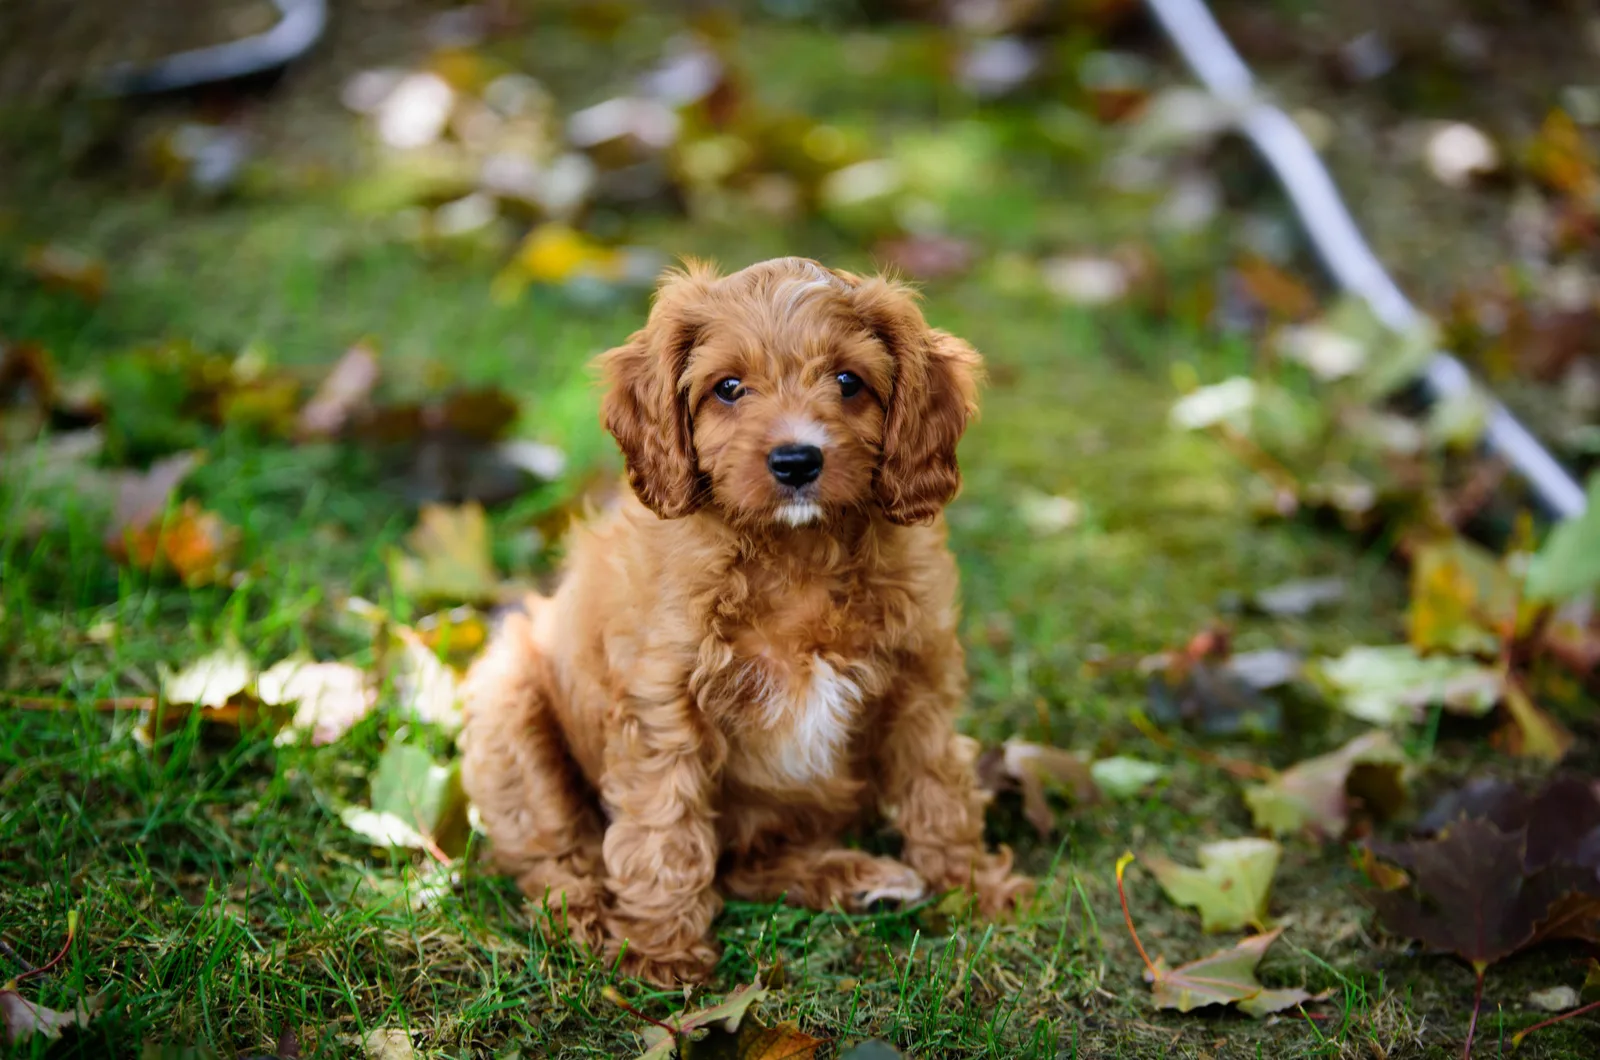 Cavapoo ouppy sits in the green grass